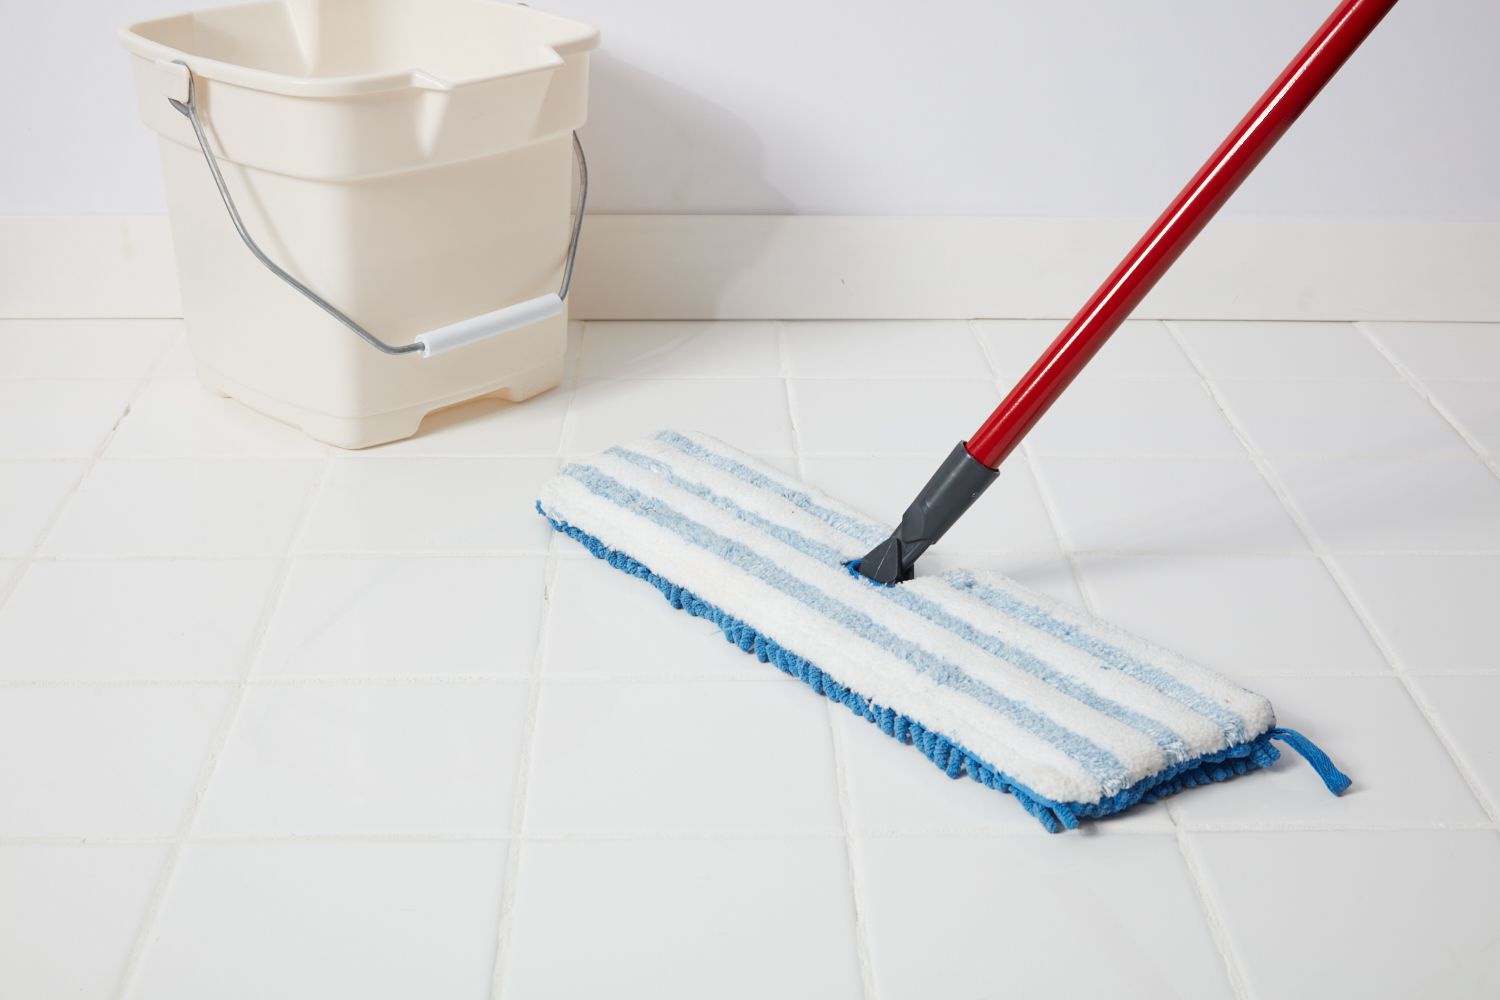 Mopping Cleaning Floor Tiles